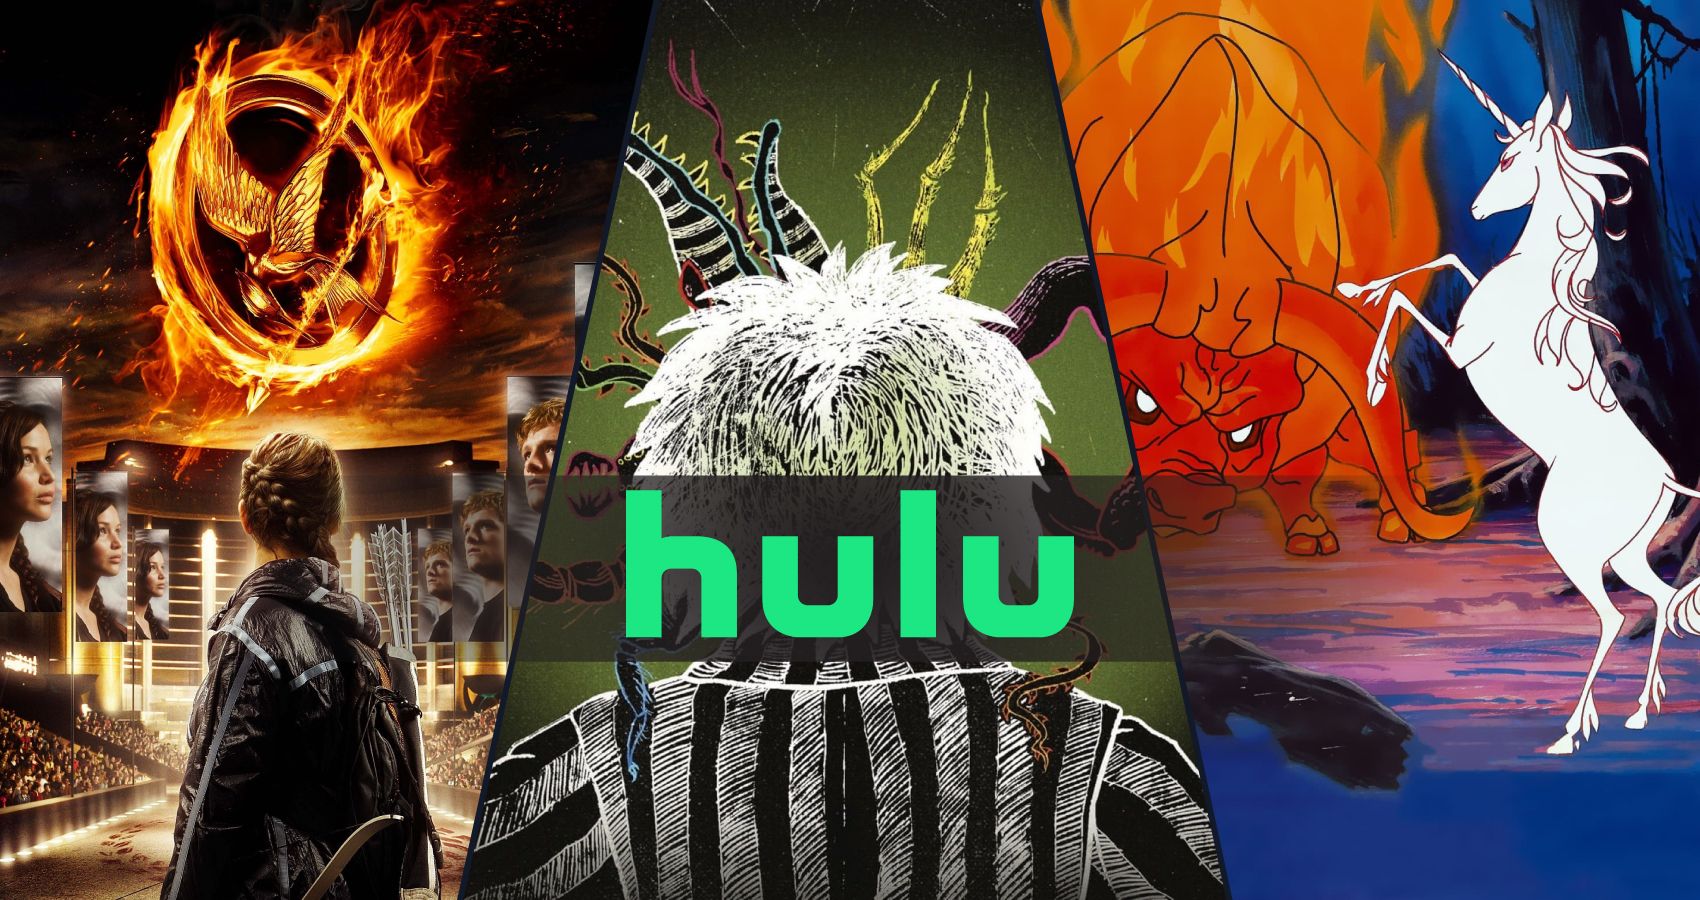 Best Movies Coming to Hulu in May 2023 The Hunger Games, Beetlejuice, The Last Unicorn